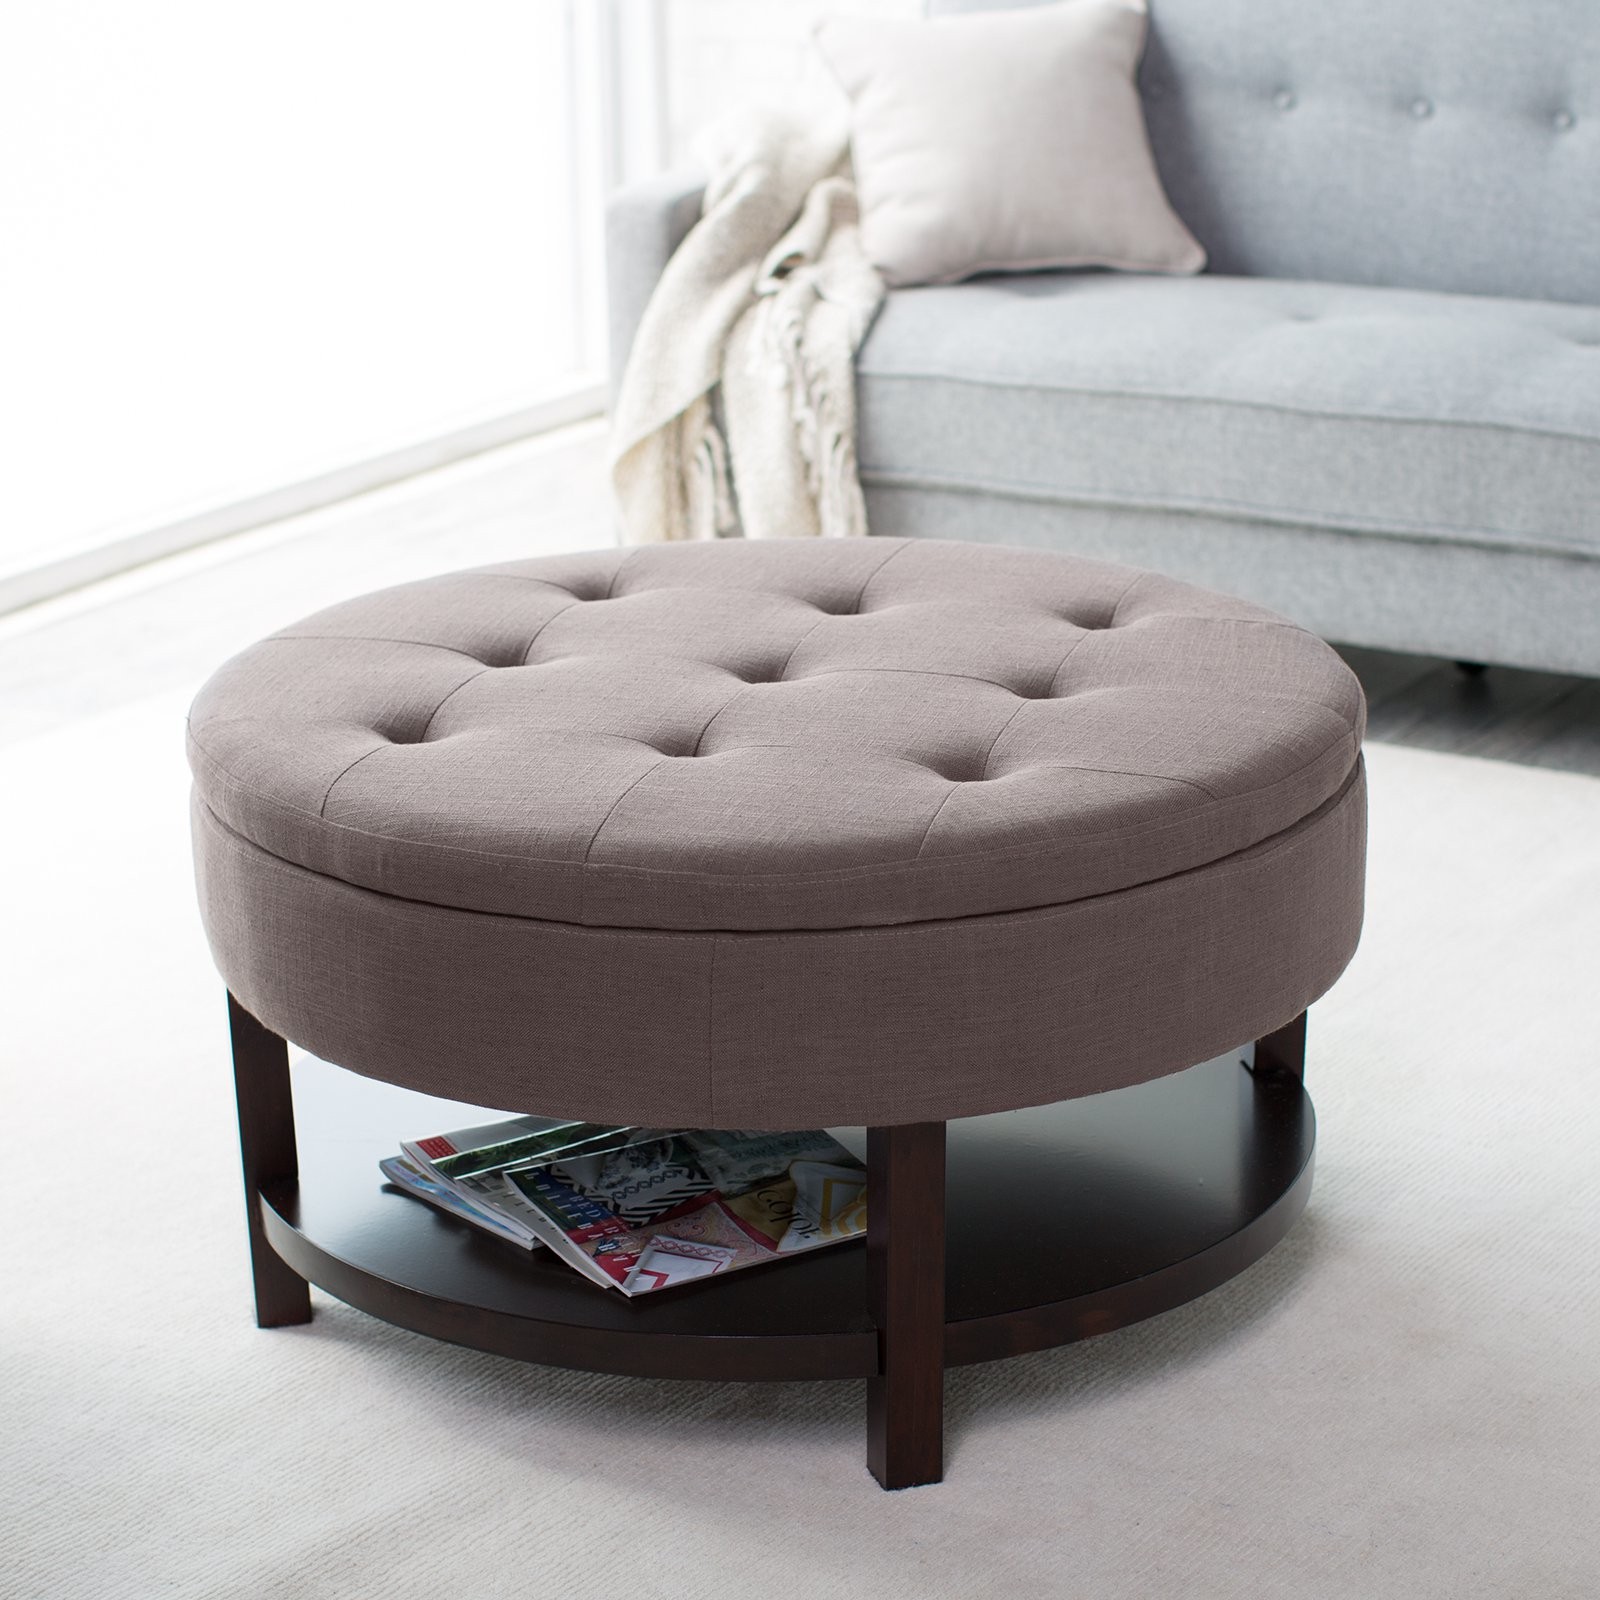 Cushion coffee table with storage furniture roy home design 12